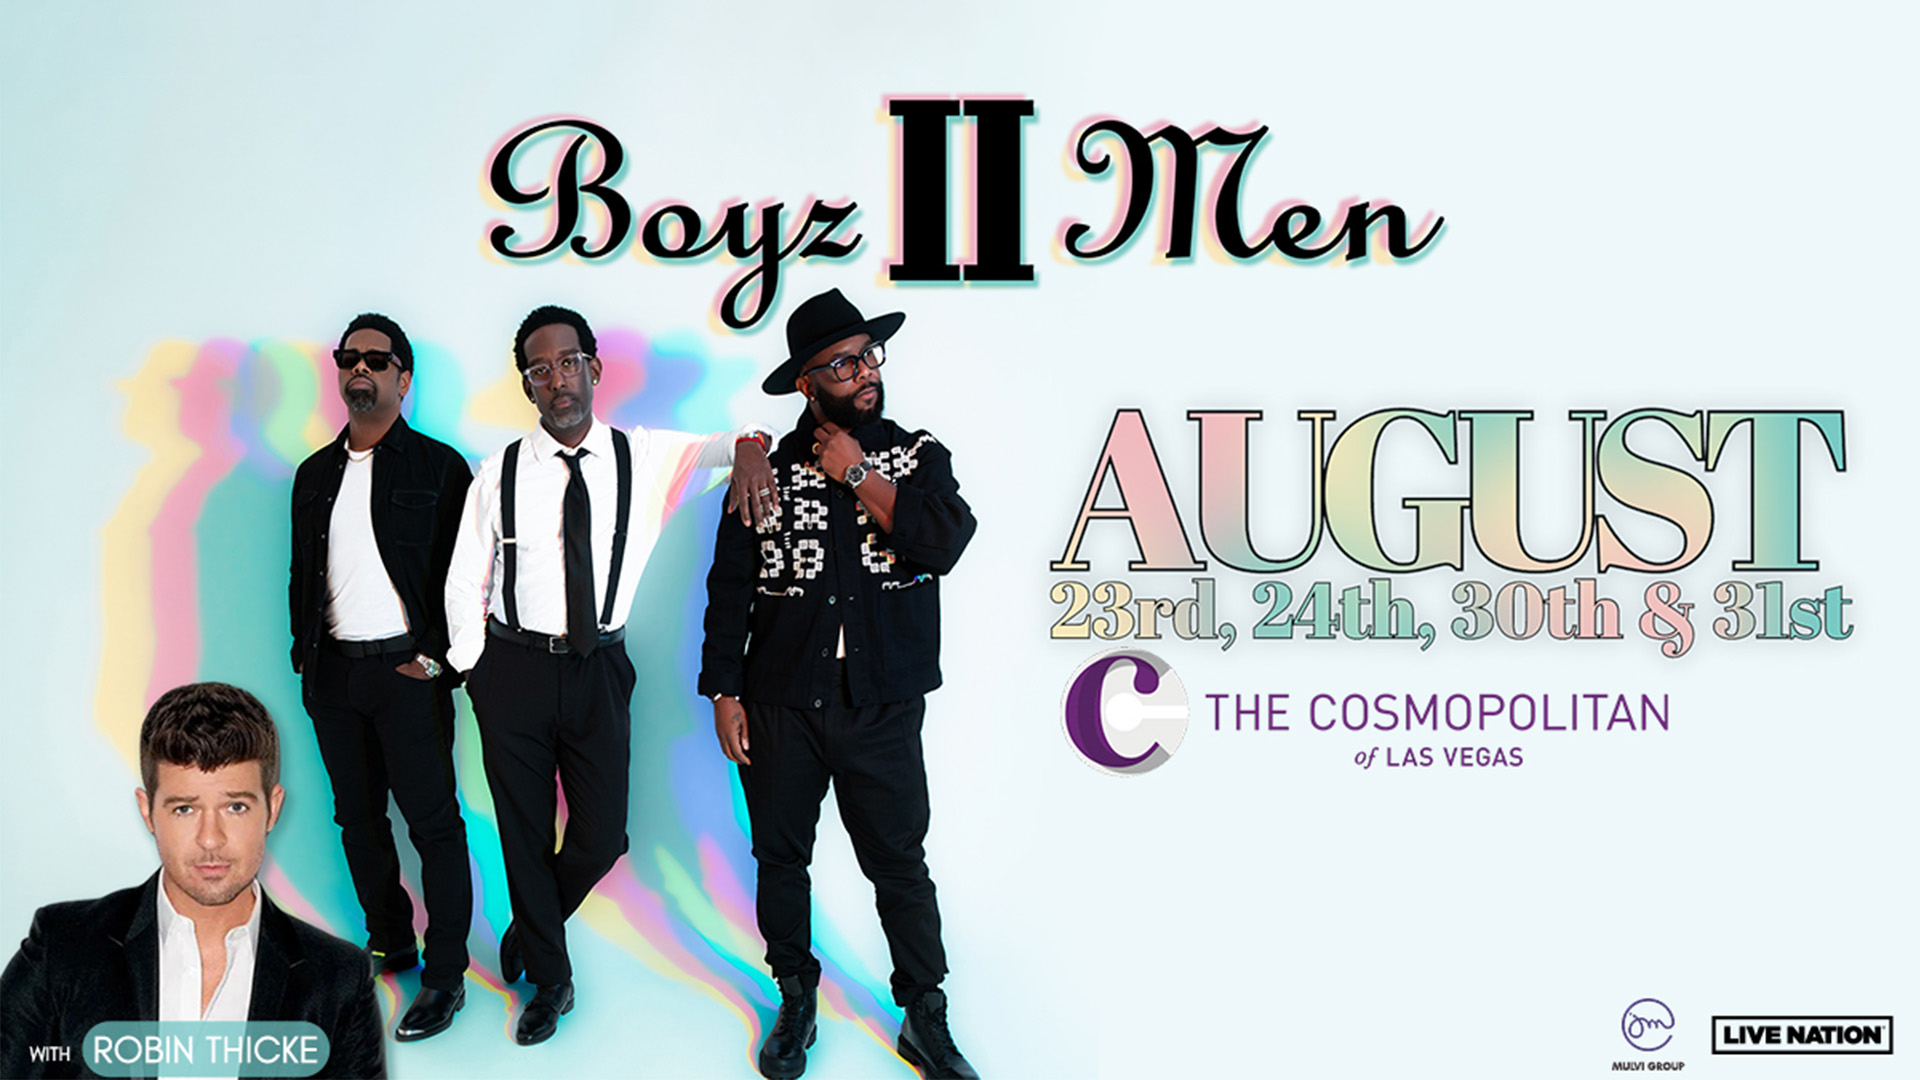 Get Presale Tickets to Boyz II Men with Robin Thicke's Four-Night Las Vegas Engagement